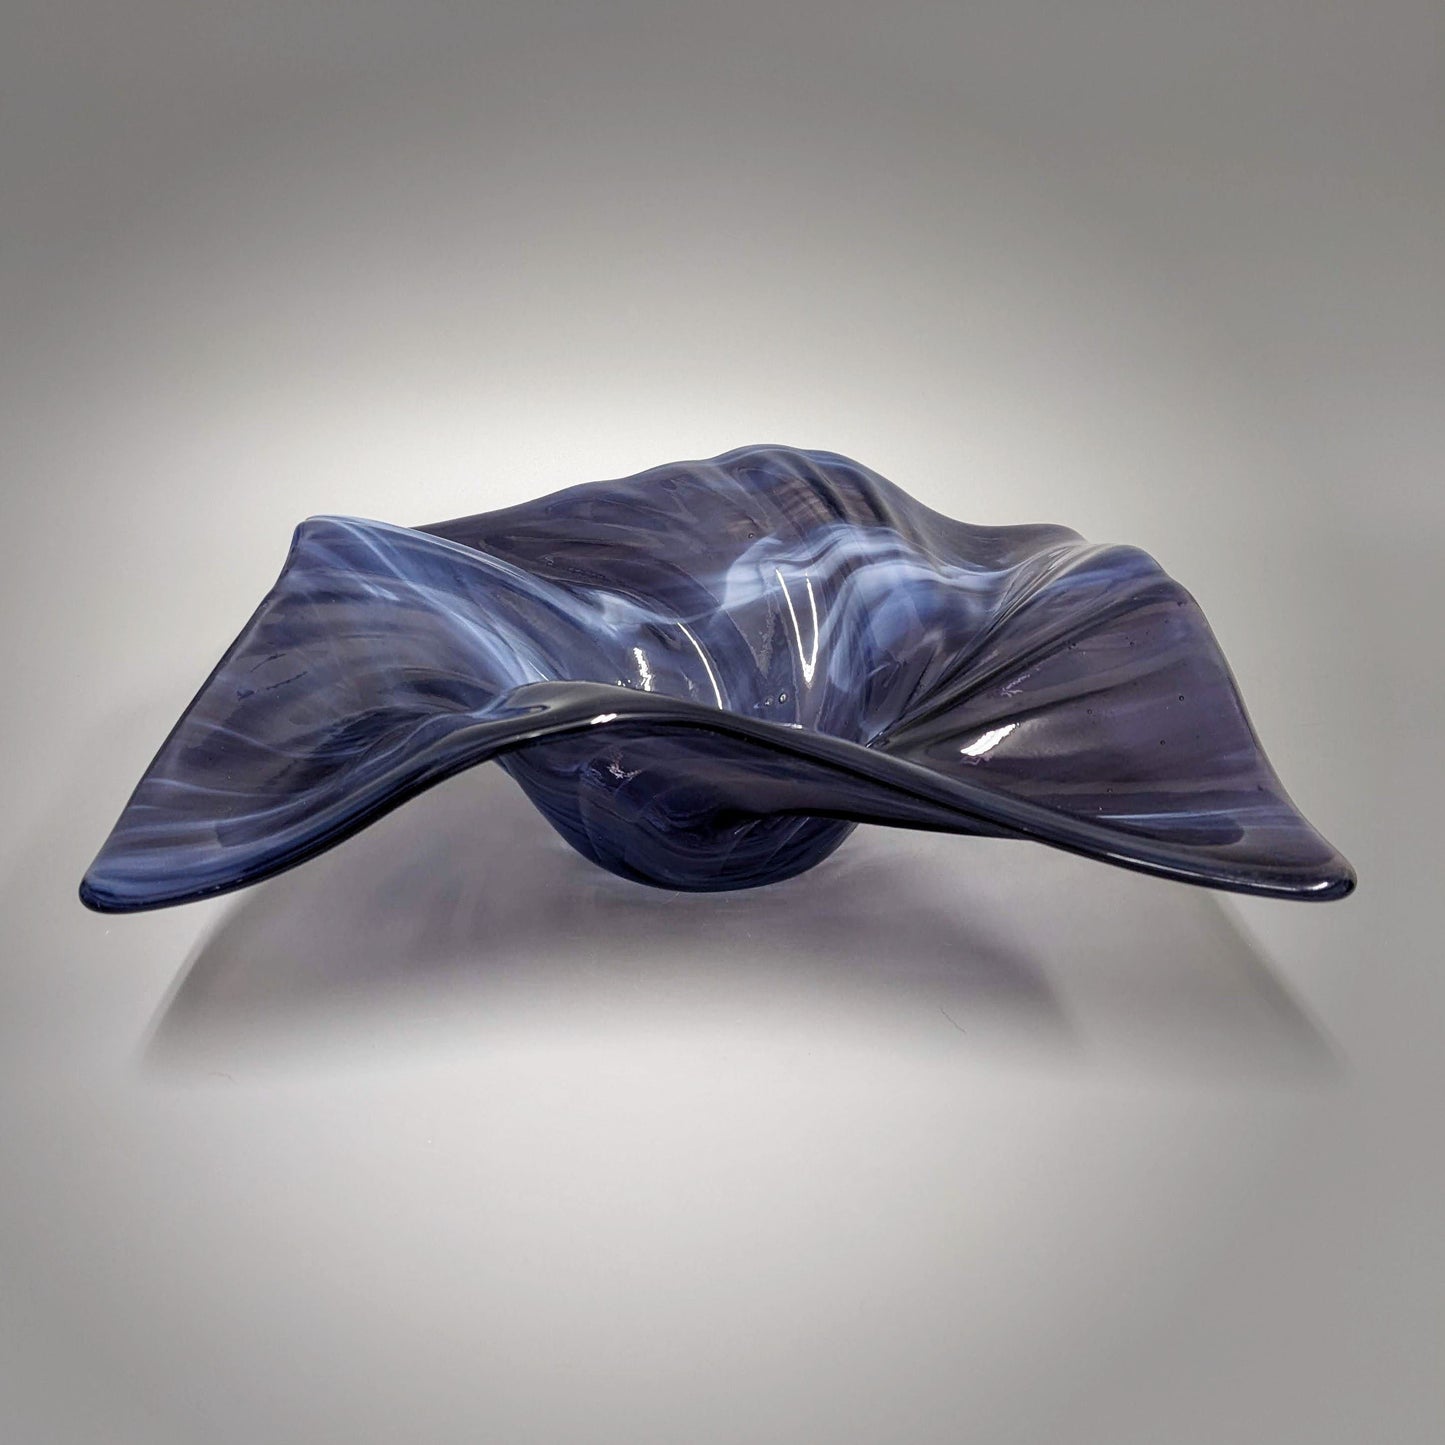 Glass Art Wave Bowl in Bluish Purple and White